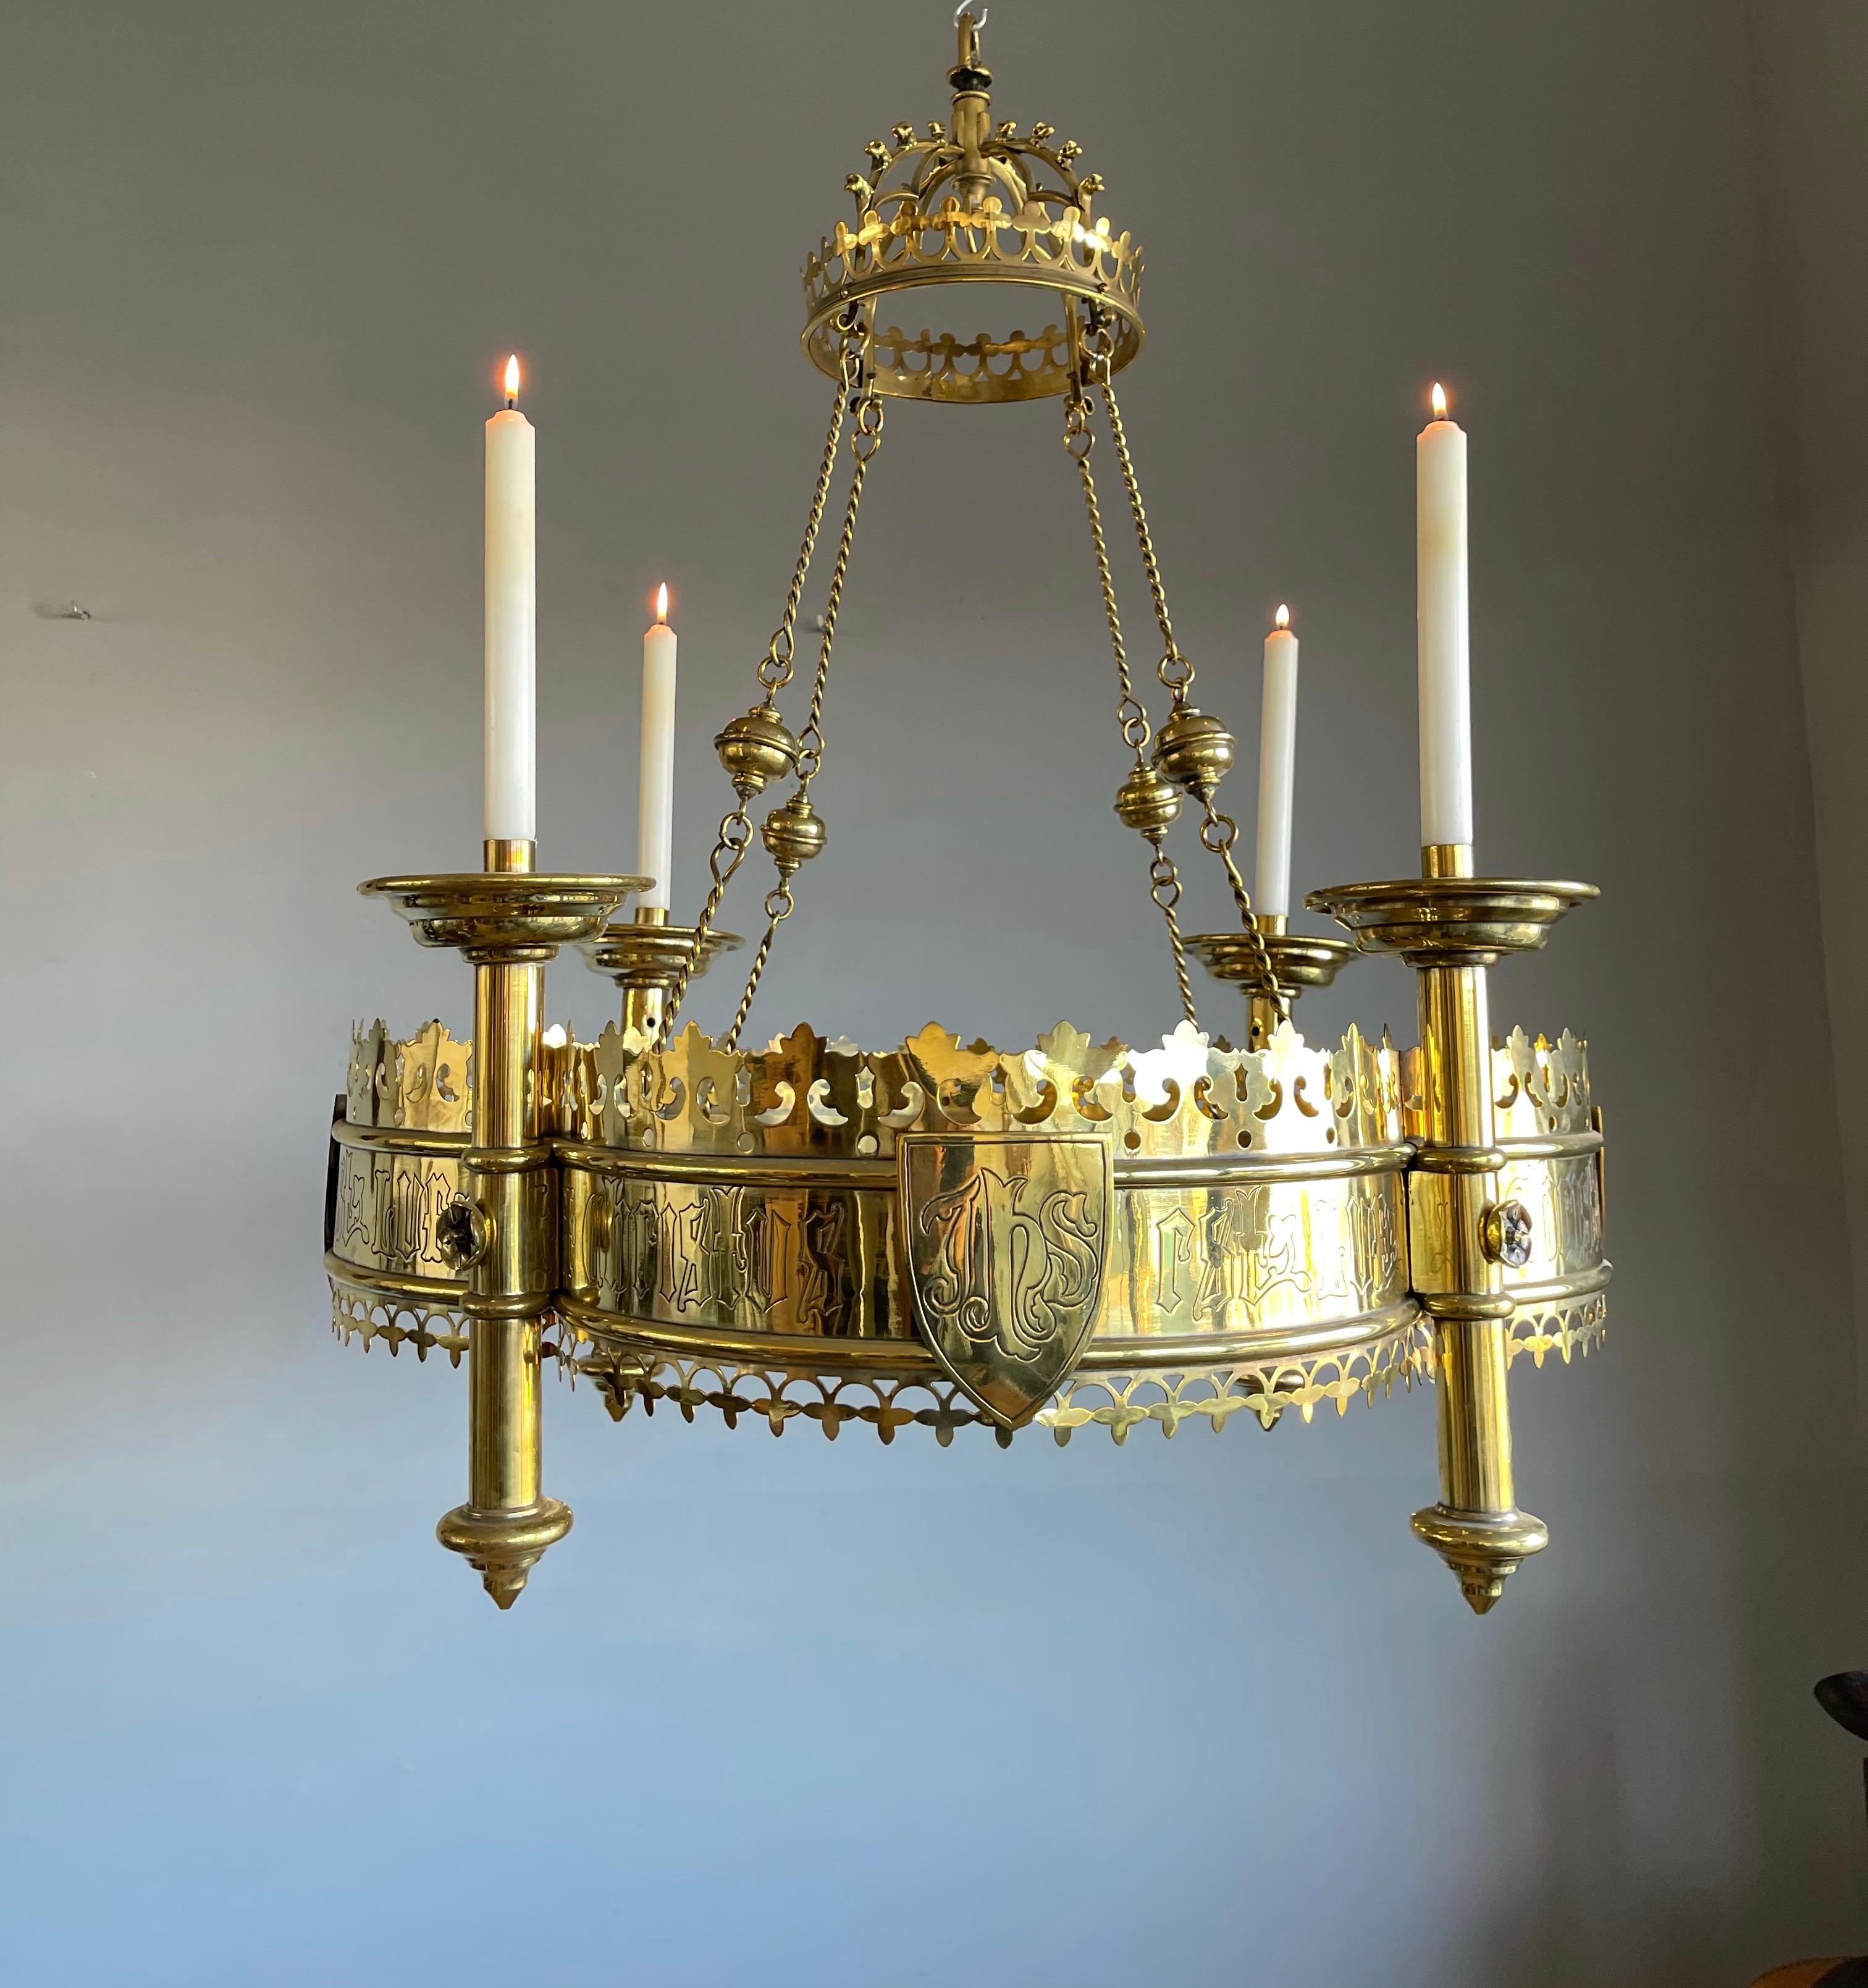 Beautiful and meaningful church relic from the late 1800s.

This stunning and all handcrafted candle chandelier from the 1880s is designed in the shape of an advent wreath. When we first saw this work of religious art last week, we directly searched